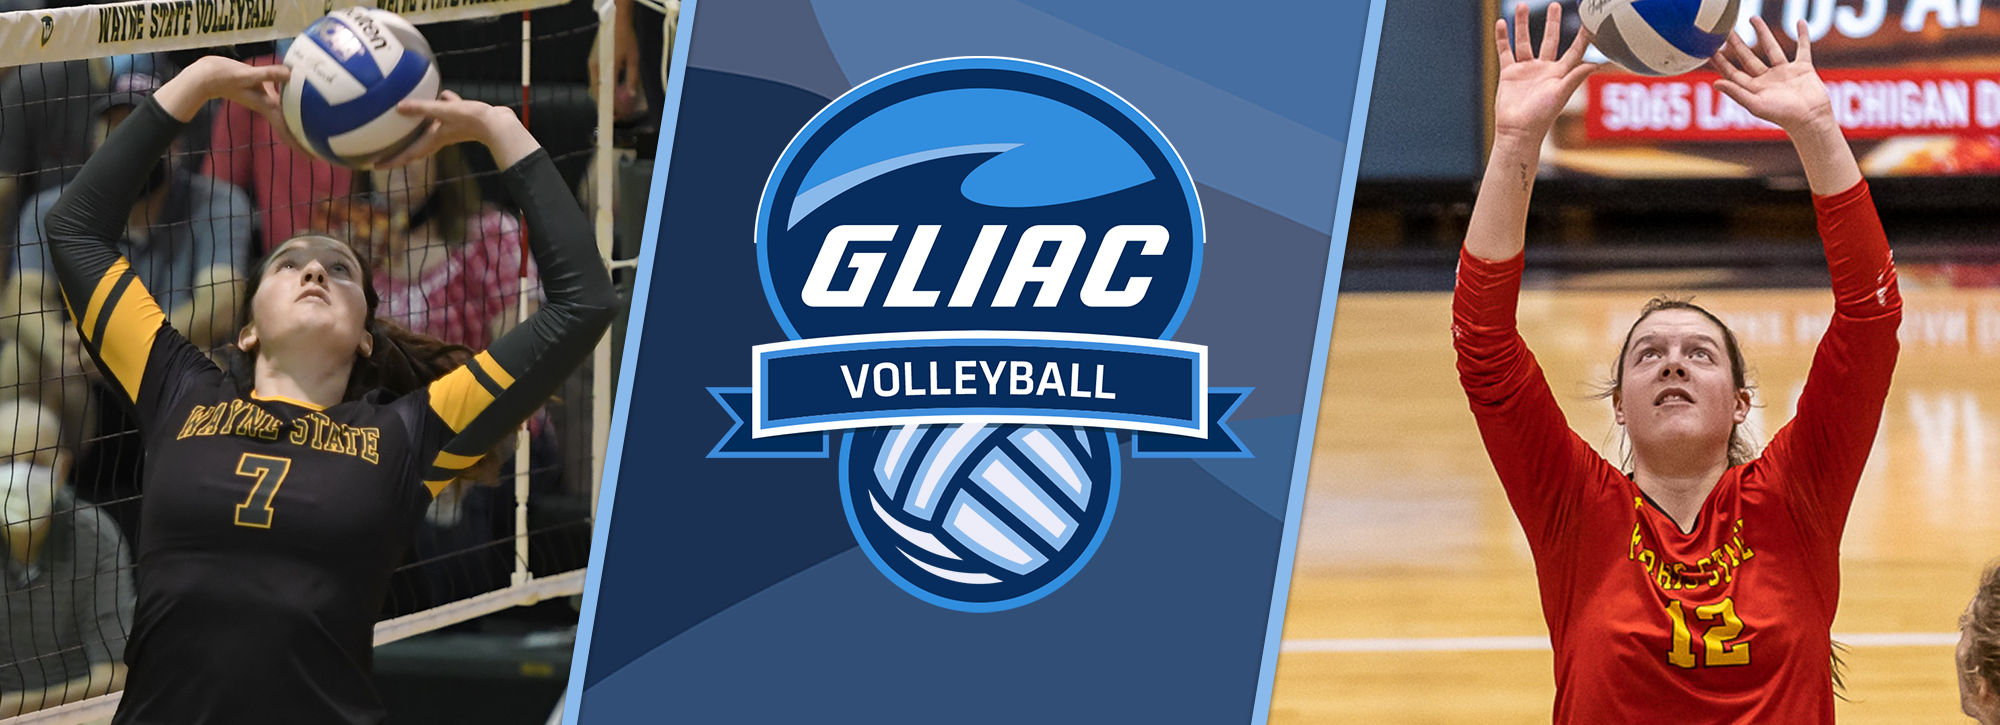 WSU's Duffield and FSU's Maat receive GLIAC volleyball players of the week honors